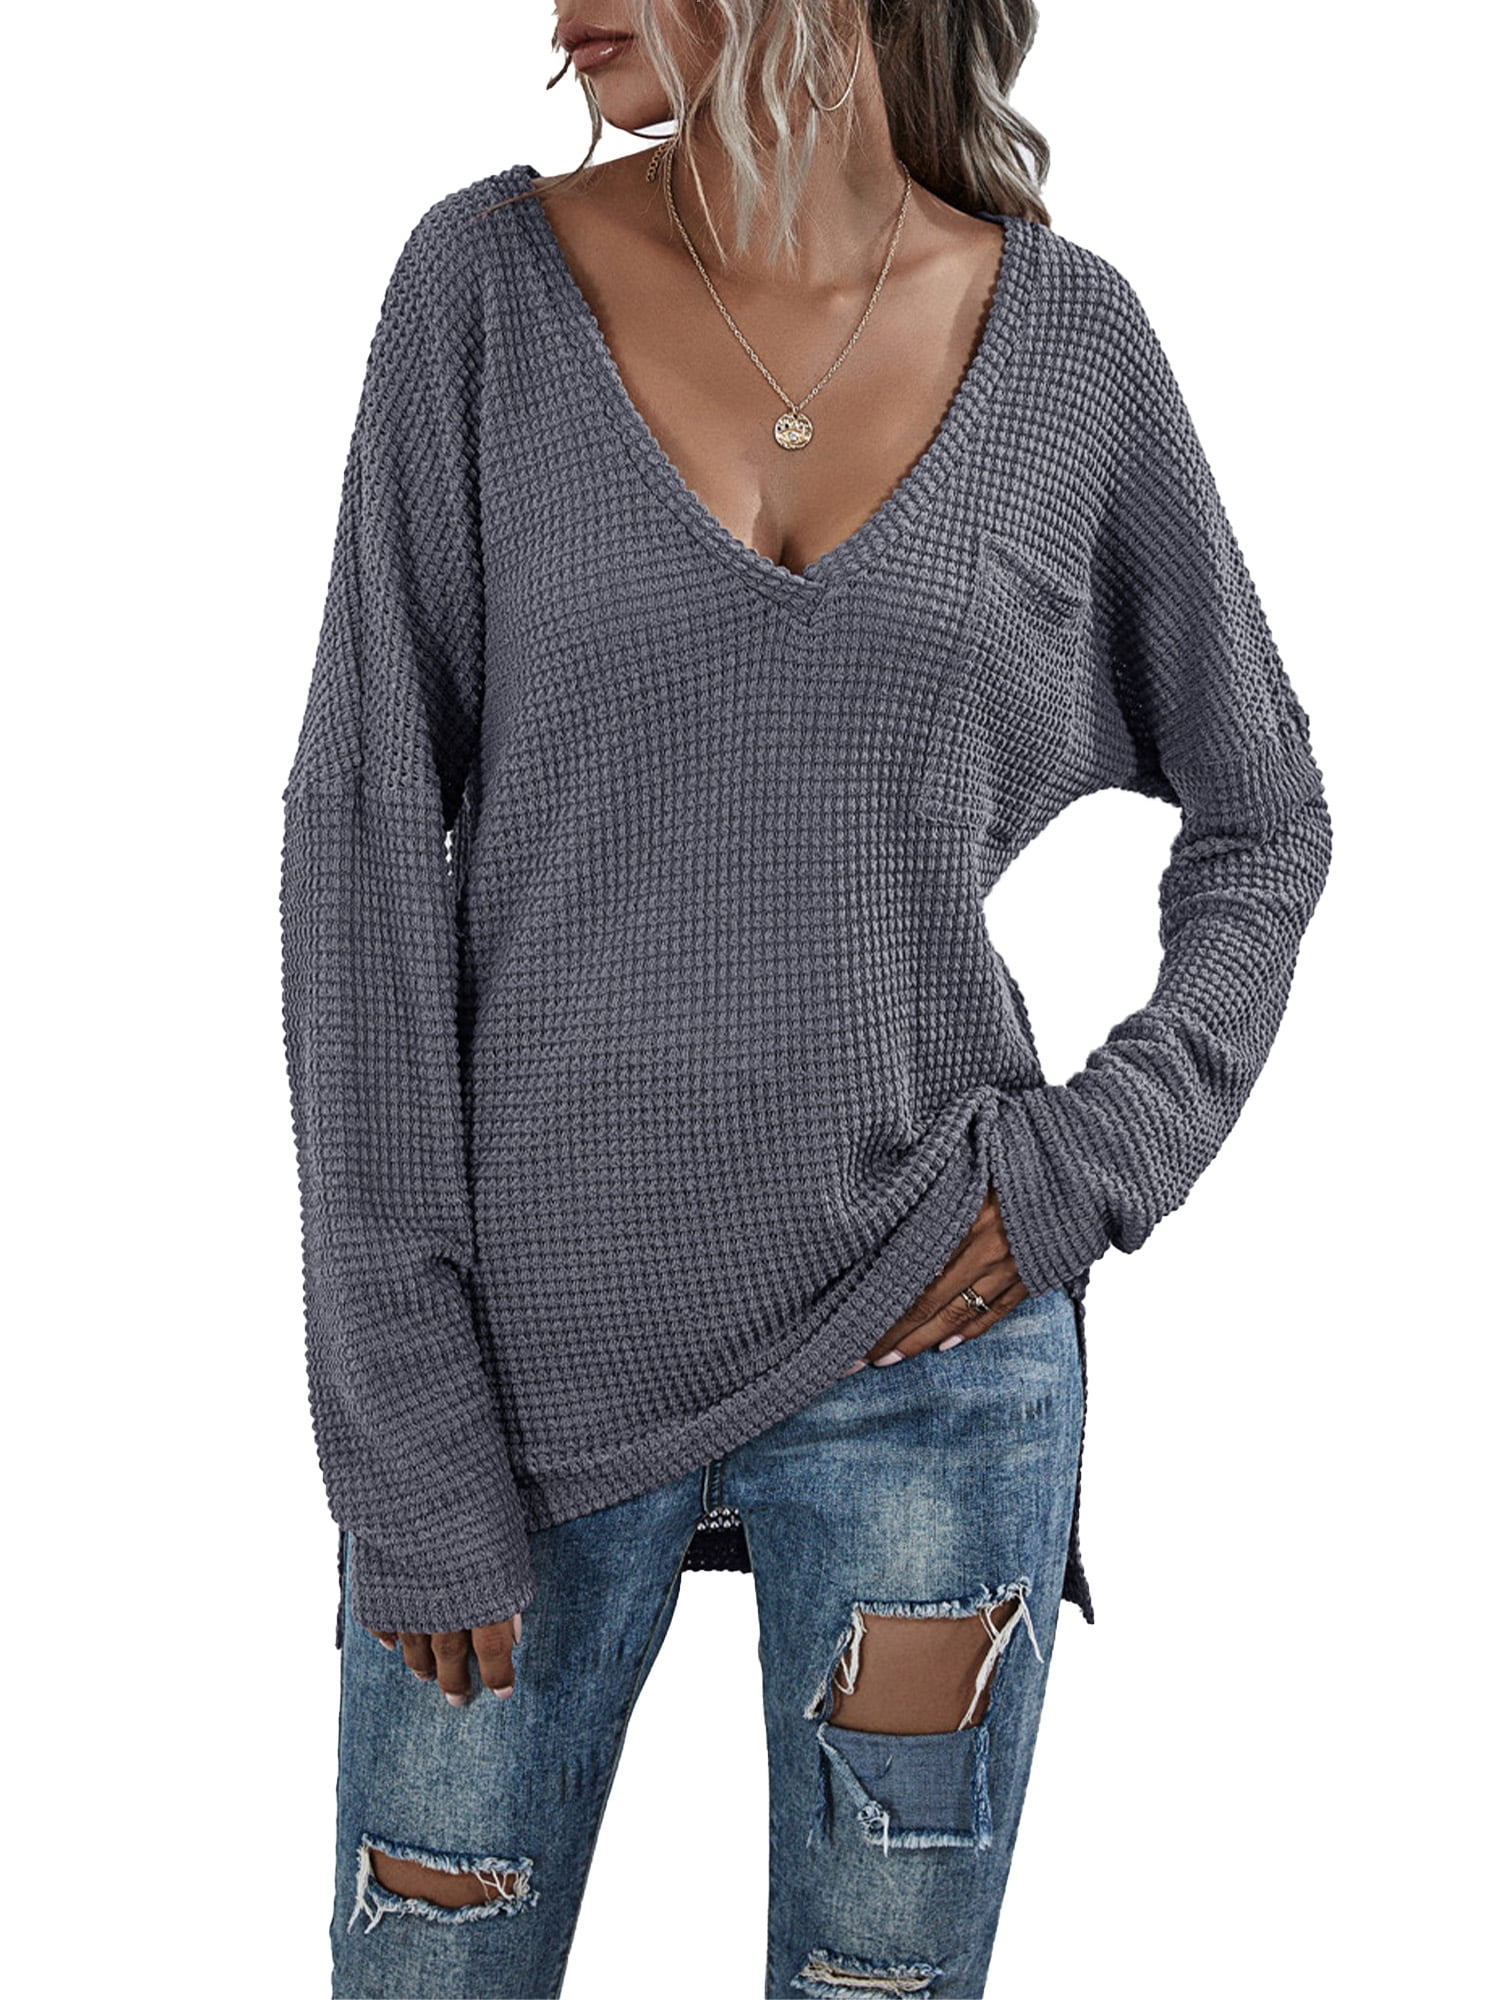 Neck Pullover Sweater Casual Knitted Jumper Tops Blouse Womens Long Sleeve V